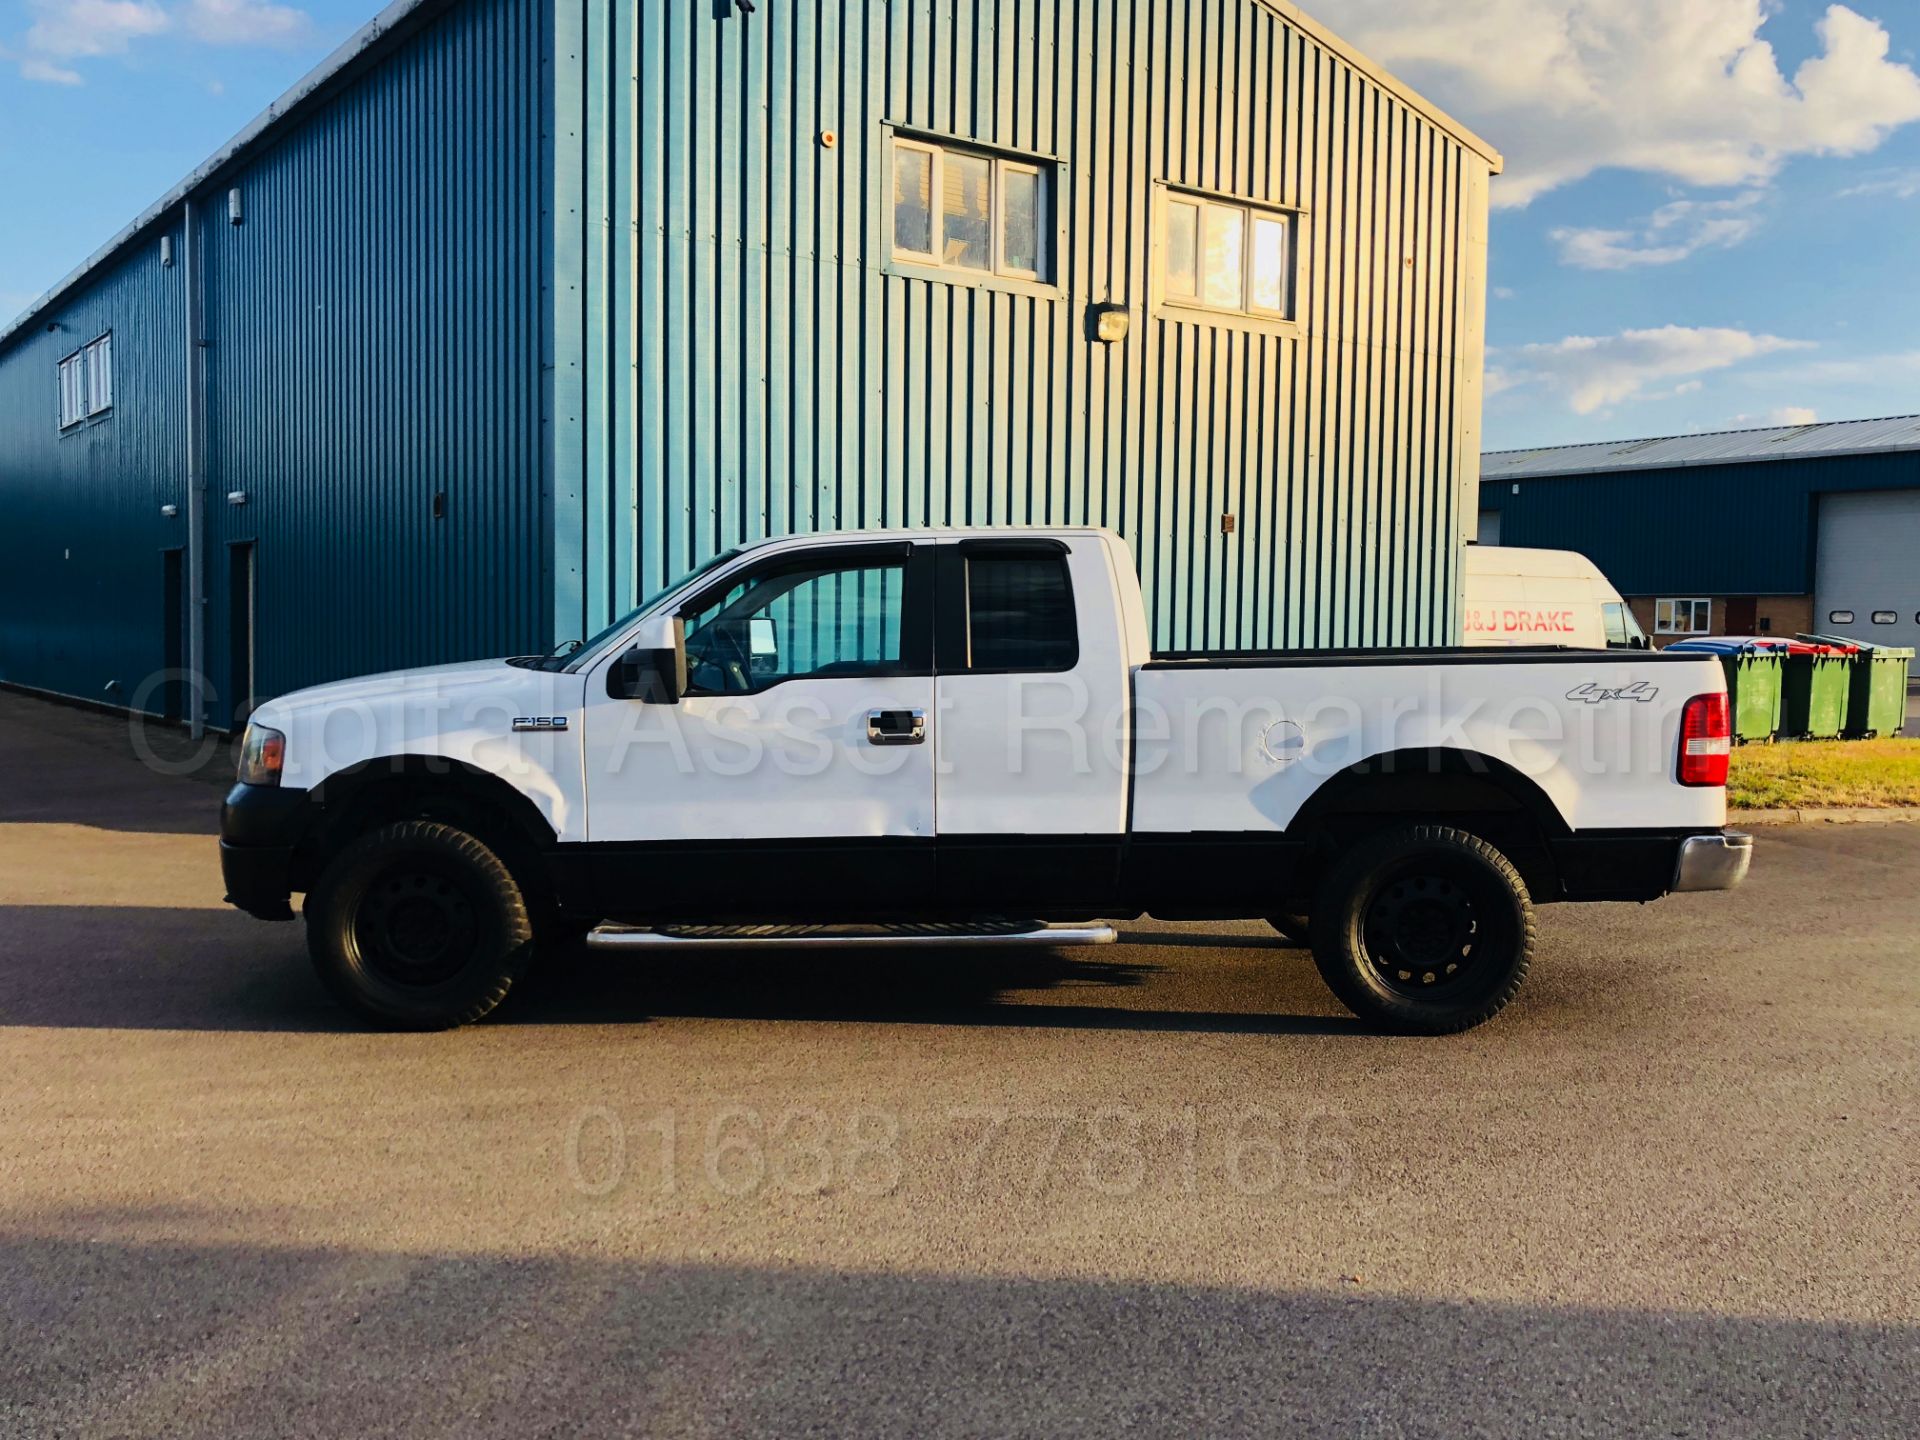 (On Sale) FORD F-150 5.4 TRITON V8 XLT EDITION KING-CAB 2008 YEAR**4X4**AUTOMATIC - Image 10 of 27